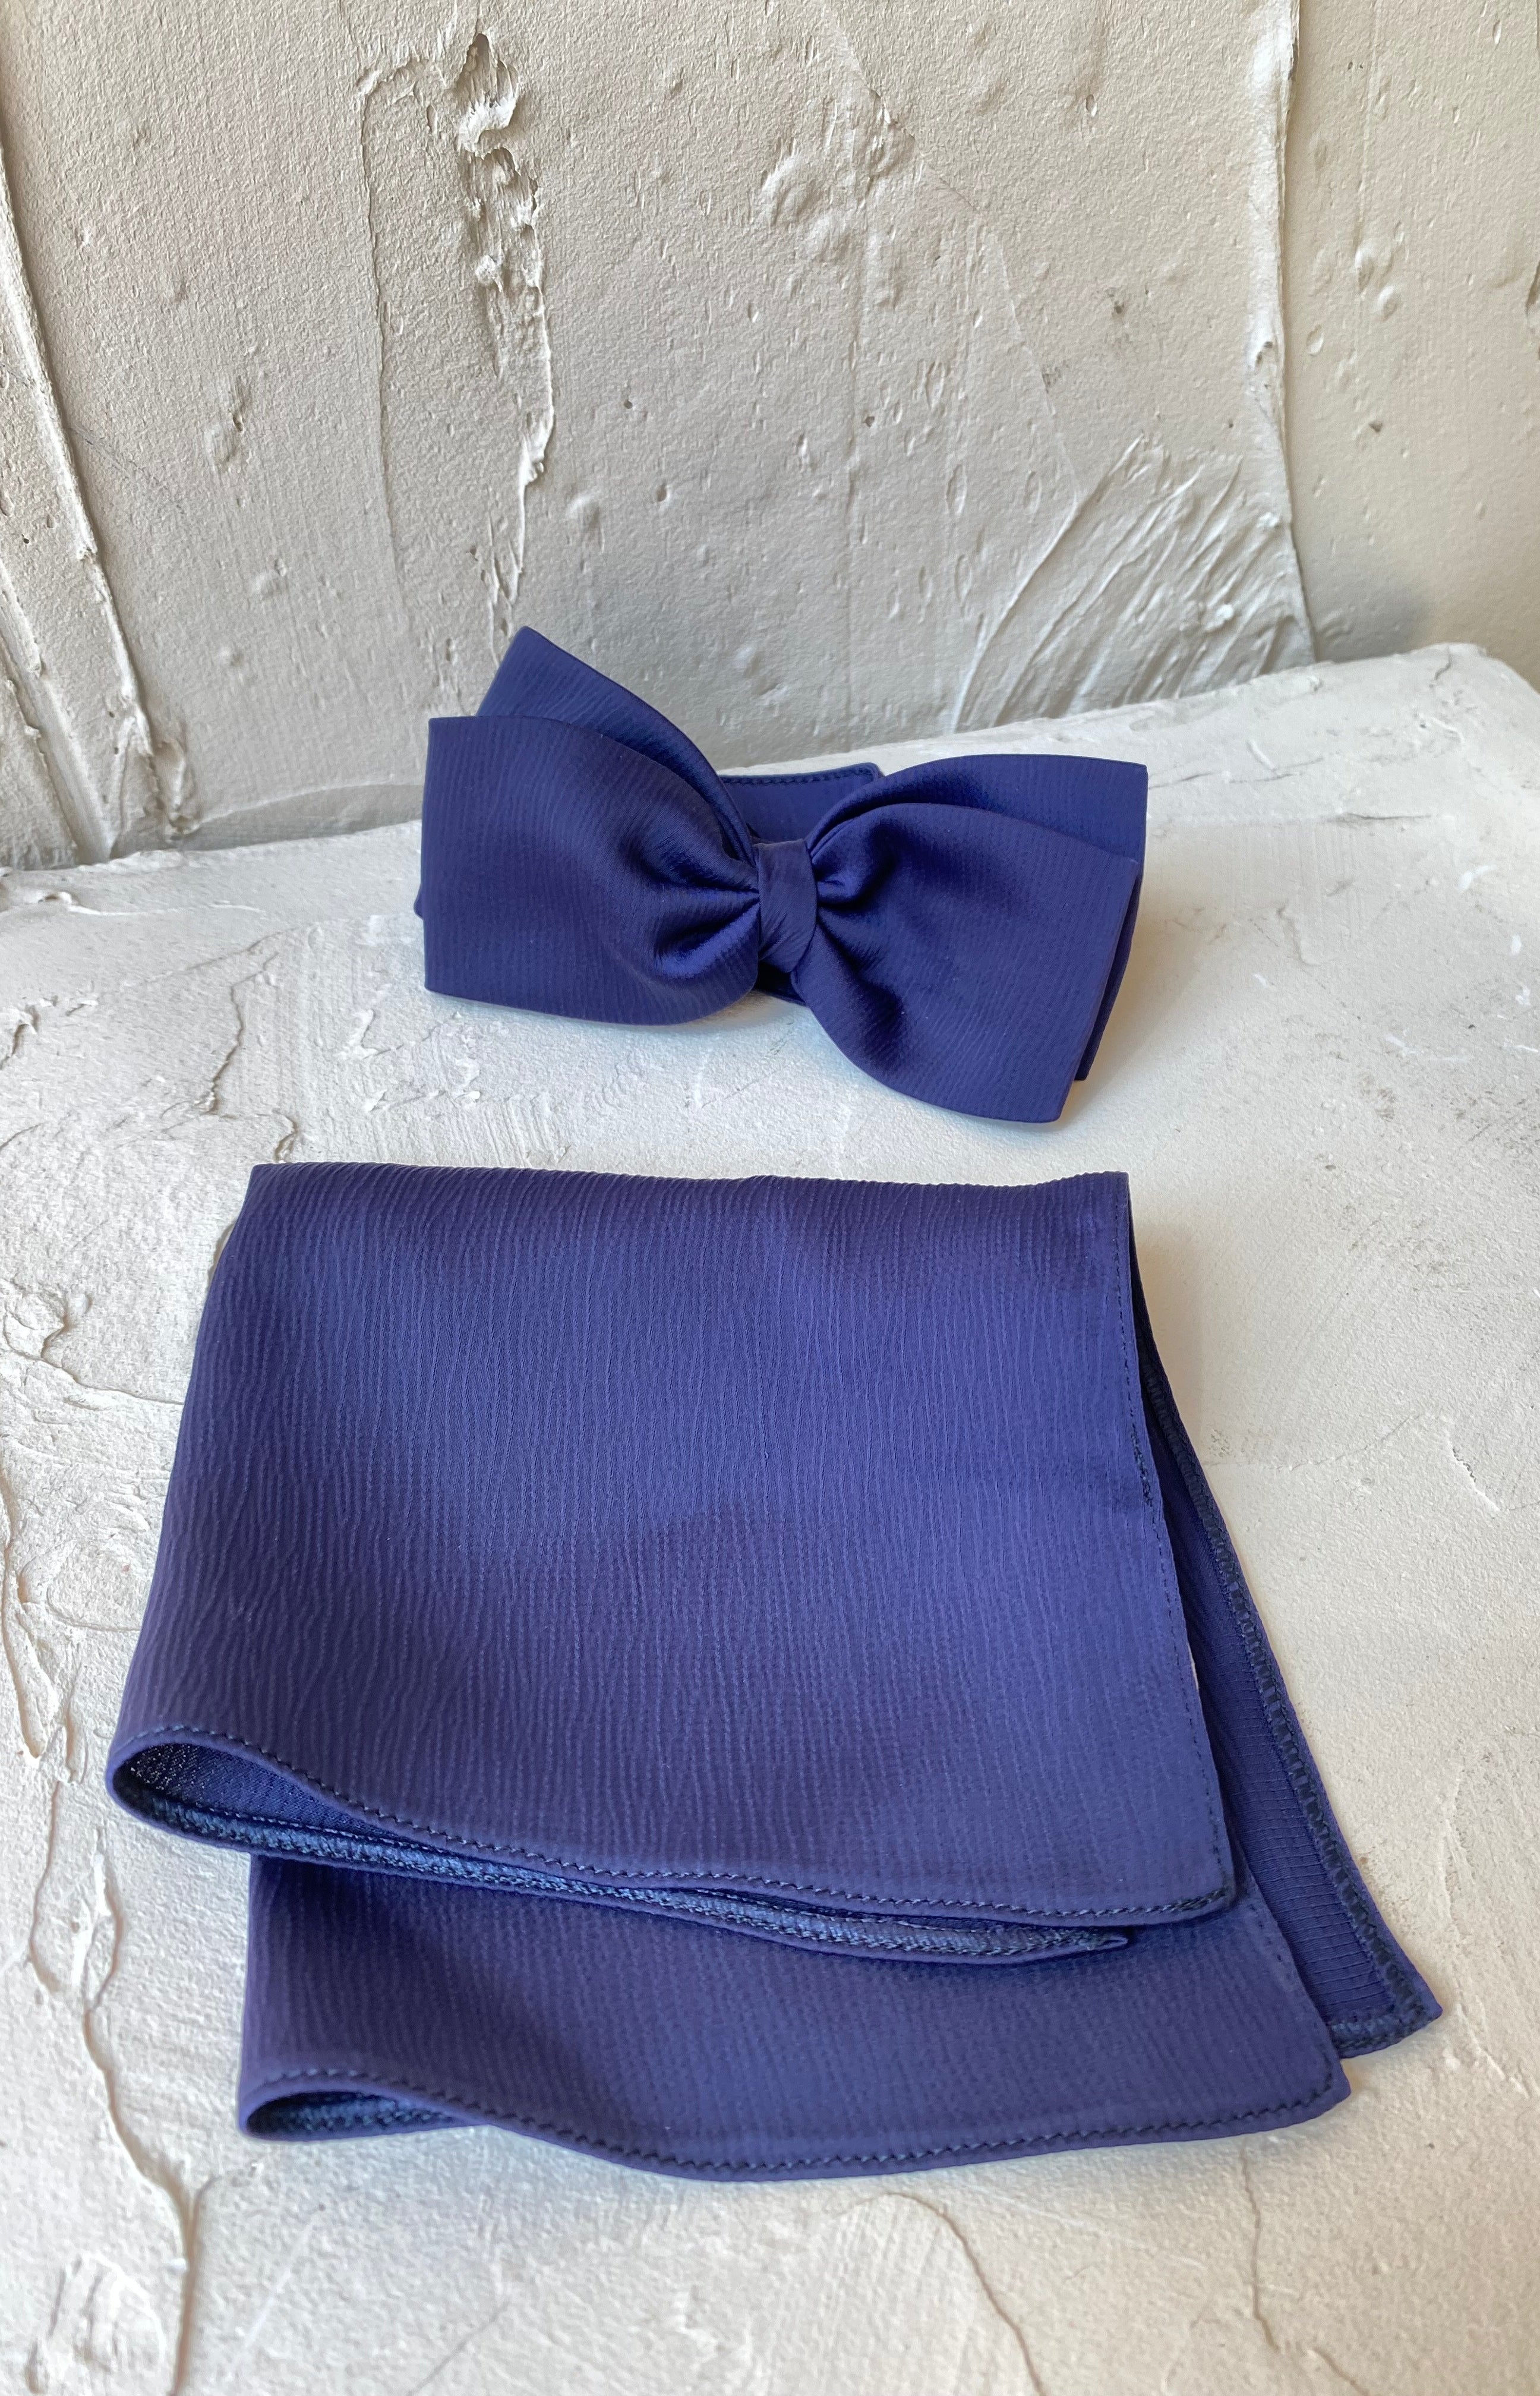 Satin Bow Tie and Pocket Square - Midnight